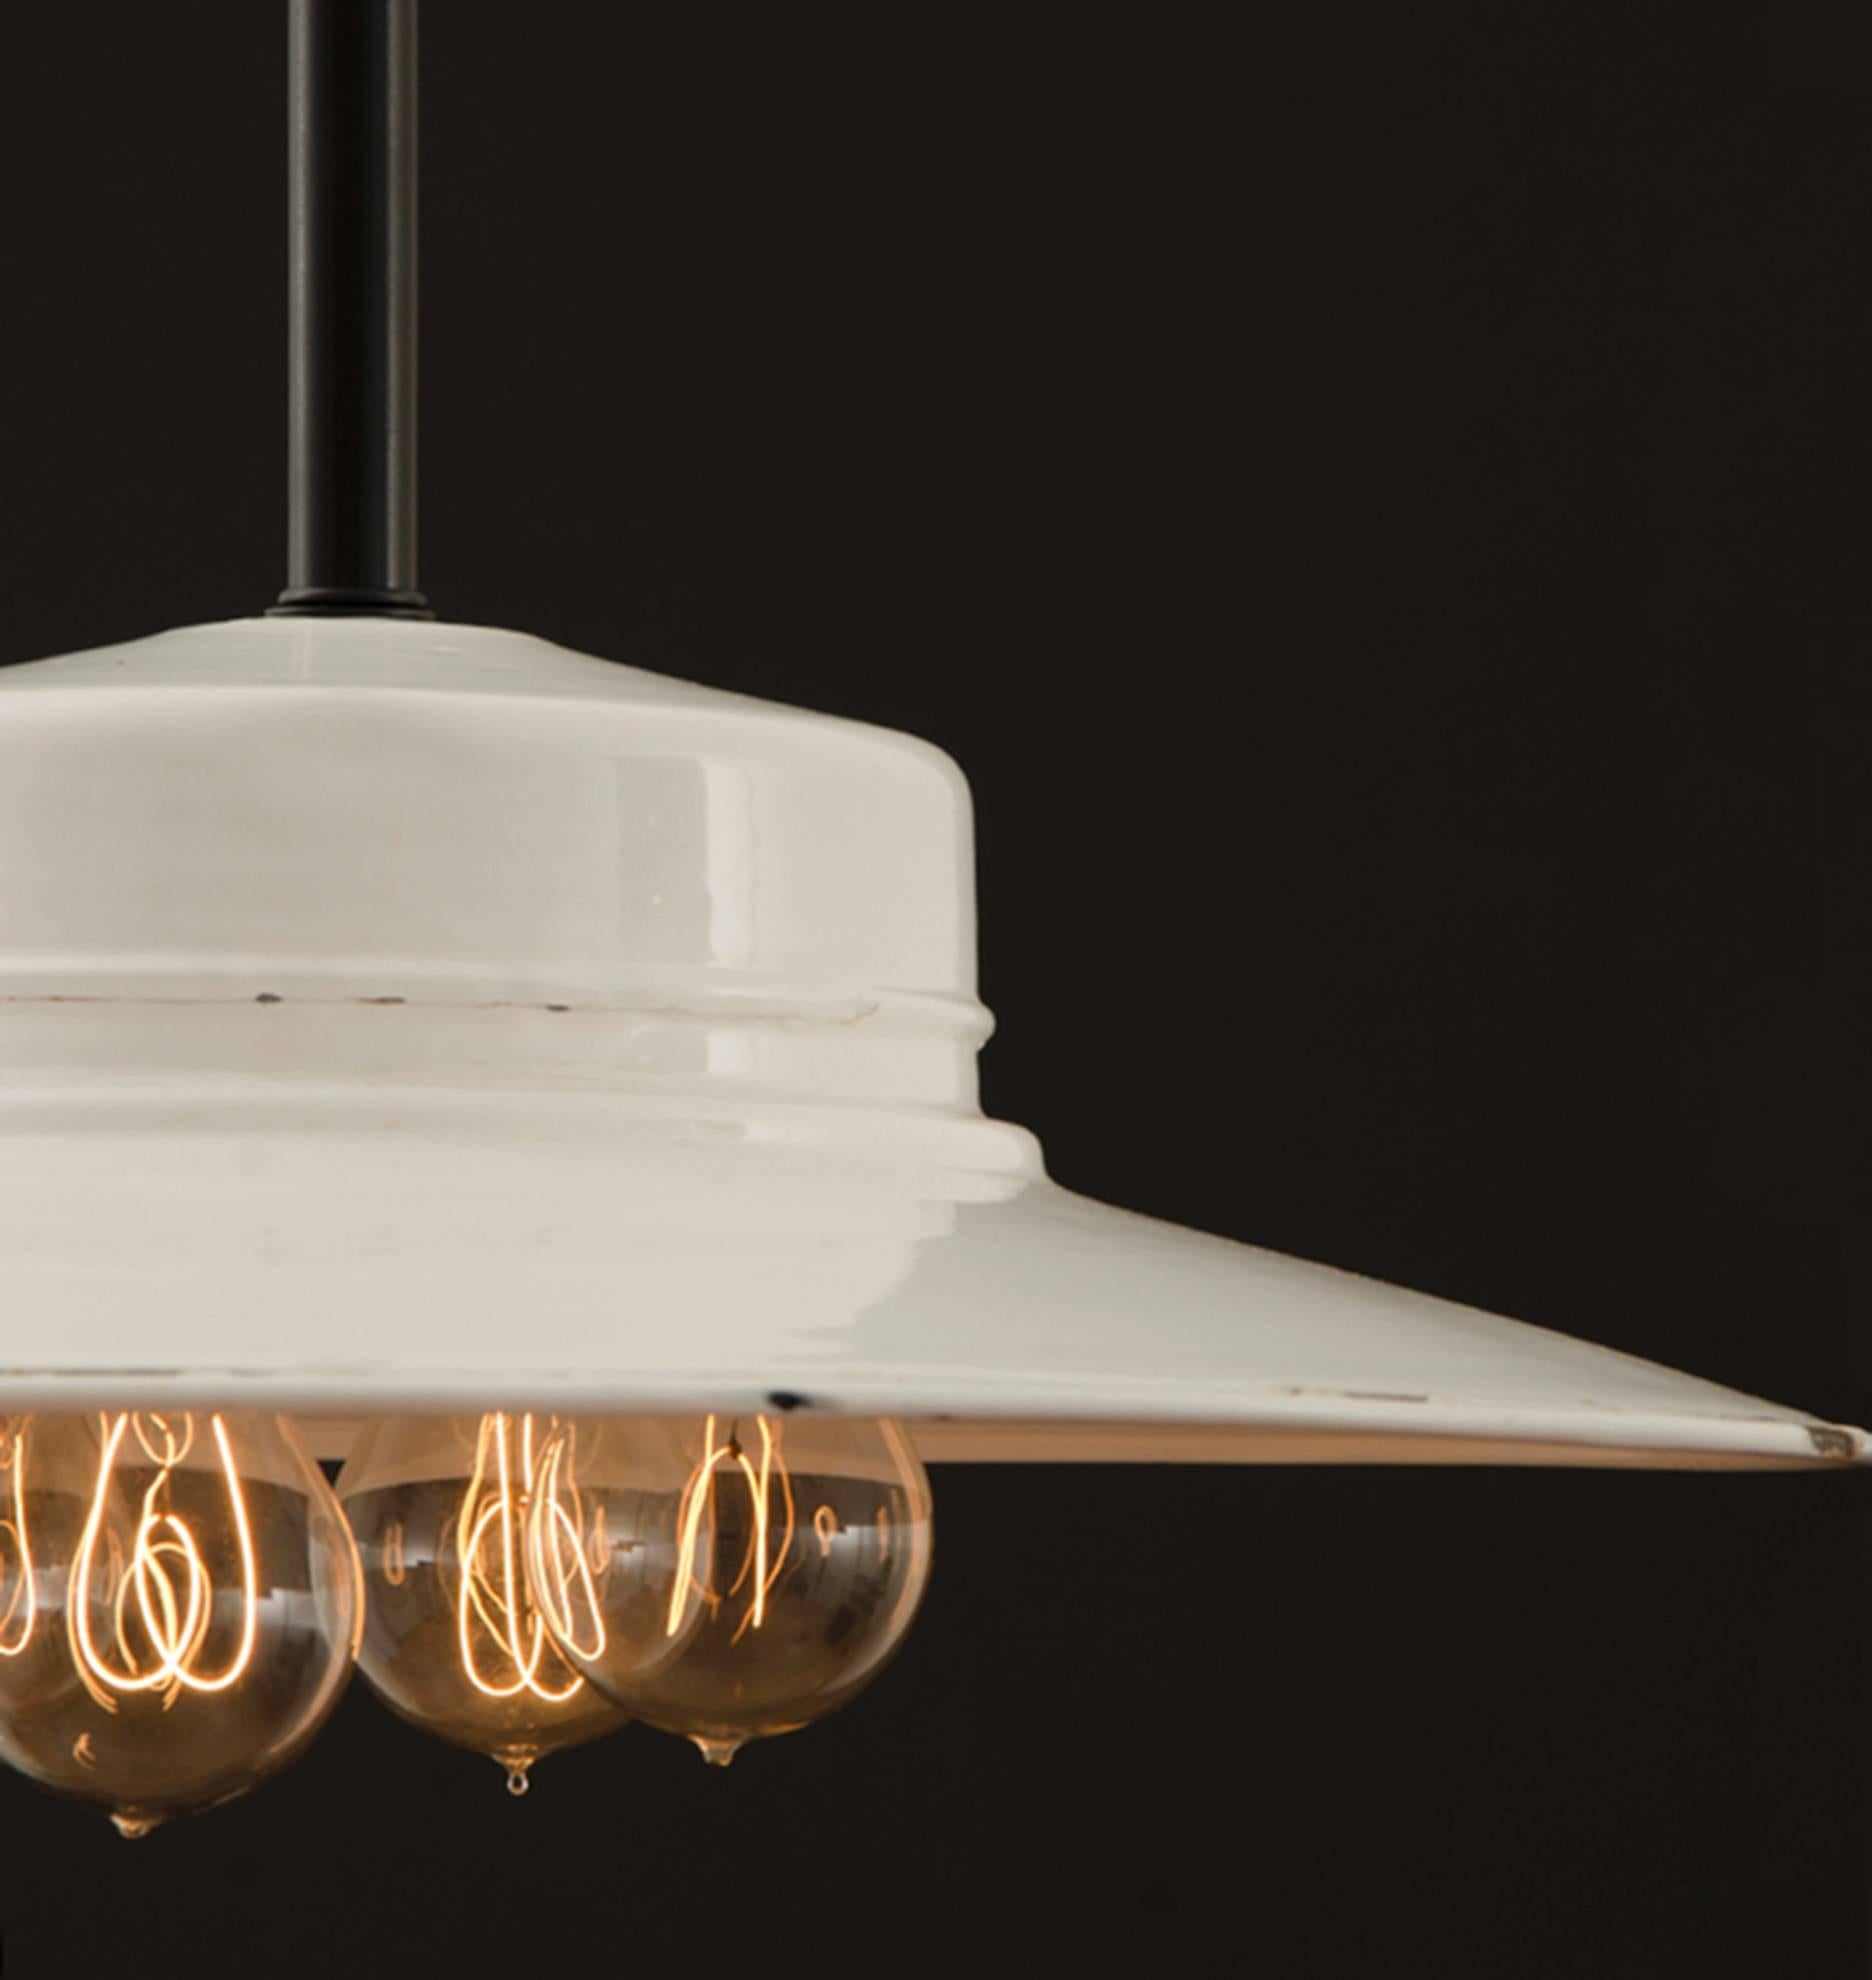 This Industrial pendant checks all the boxes for the most desirable antique Industrial lighting. Unusual design, a porcelain enamel reflector, and an early electric socket cluster all come together in this rare and unusual example from Chicago's